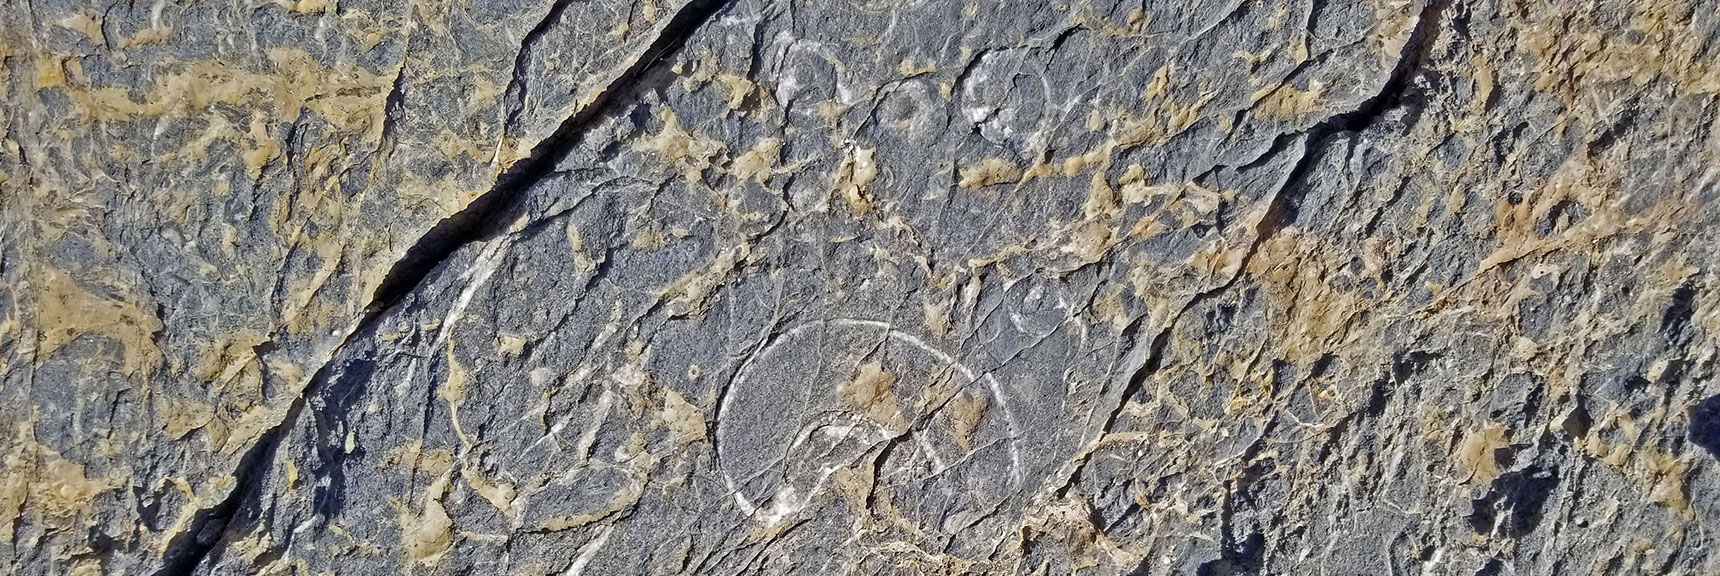 Look Closely for a Variety of Ancient Fossils | Fossil Ridge End to End | Sheep Range | Desert National Wildlife Refuge, Nevada